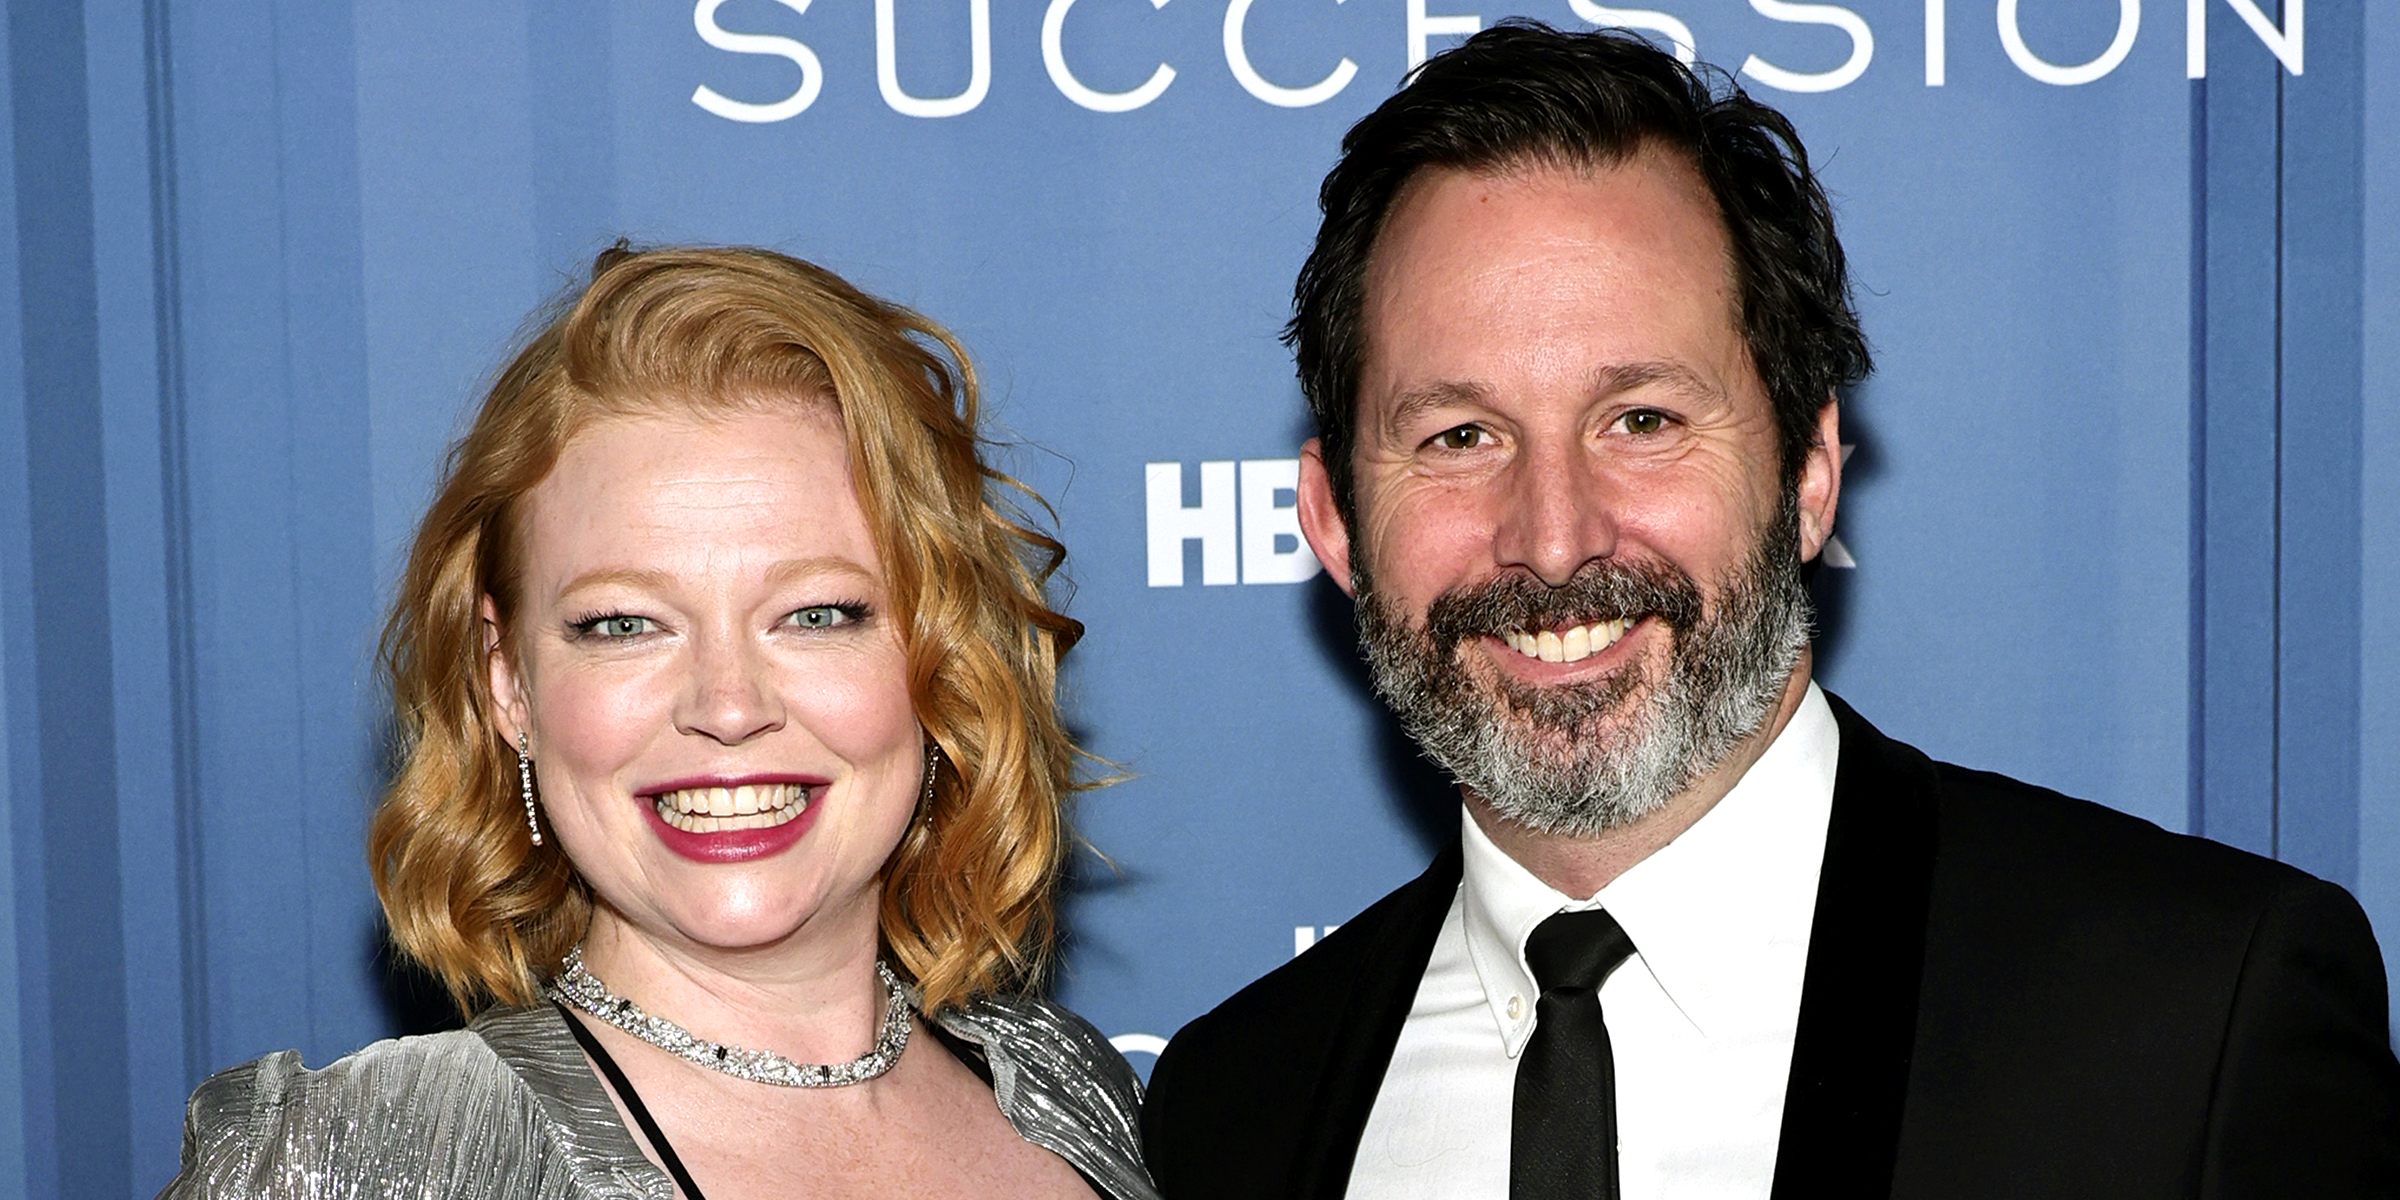 Sarah Snook and her husband Dave Lawson | Source: Getty Images